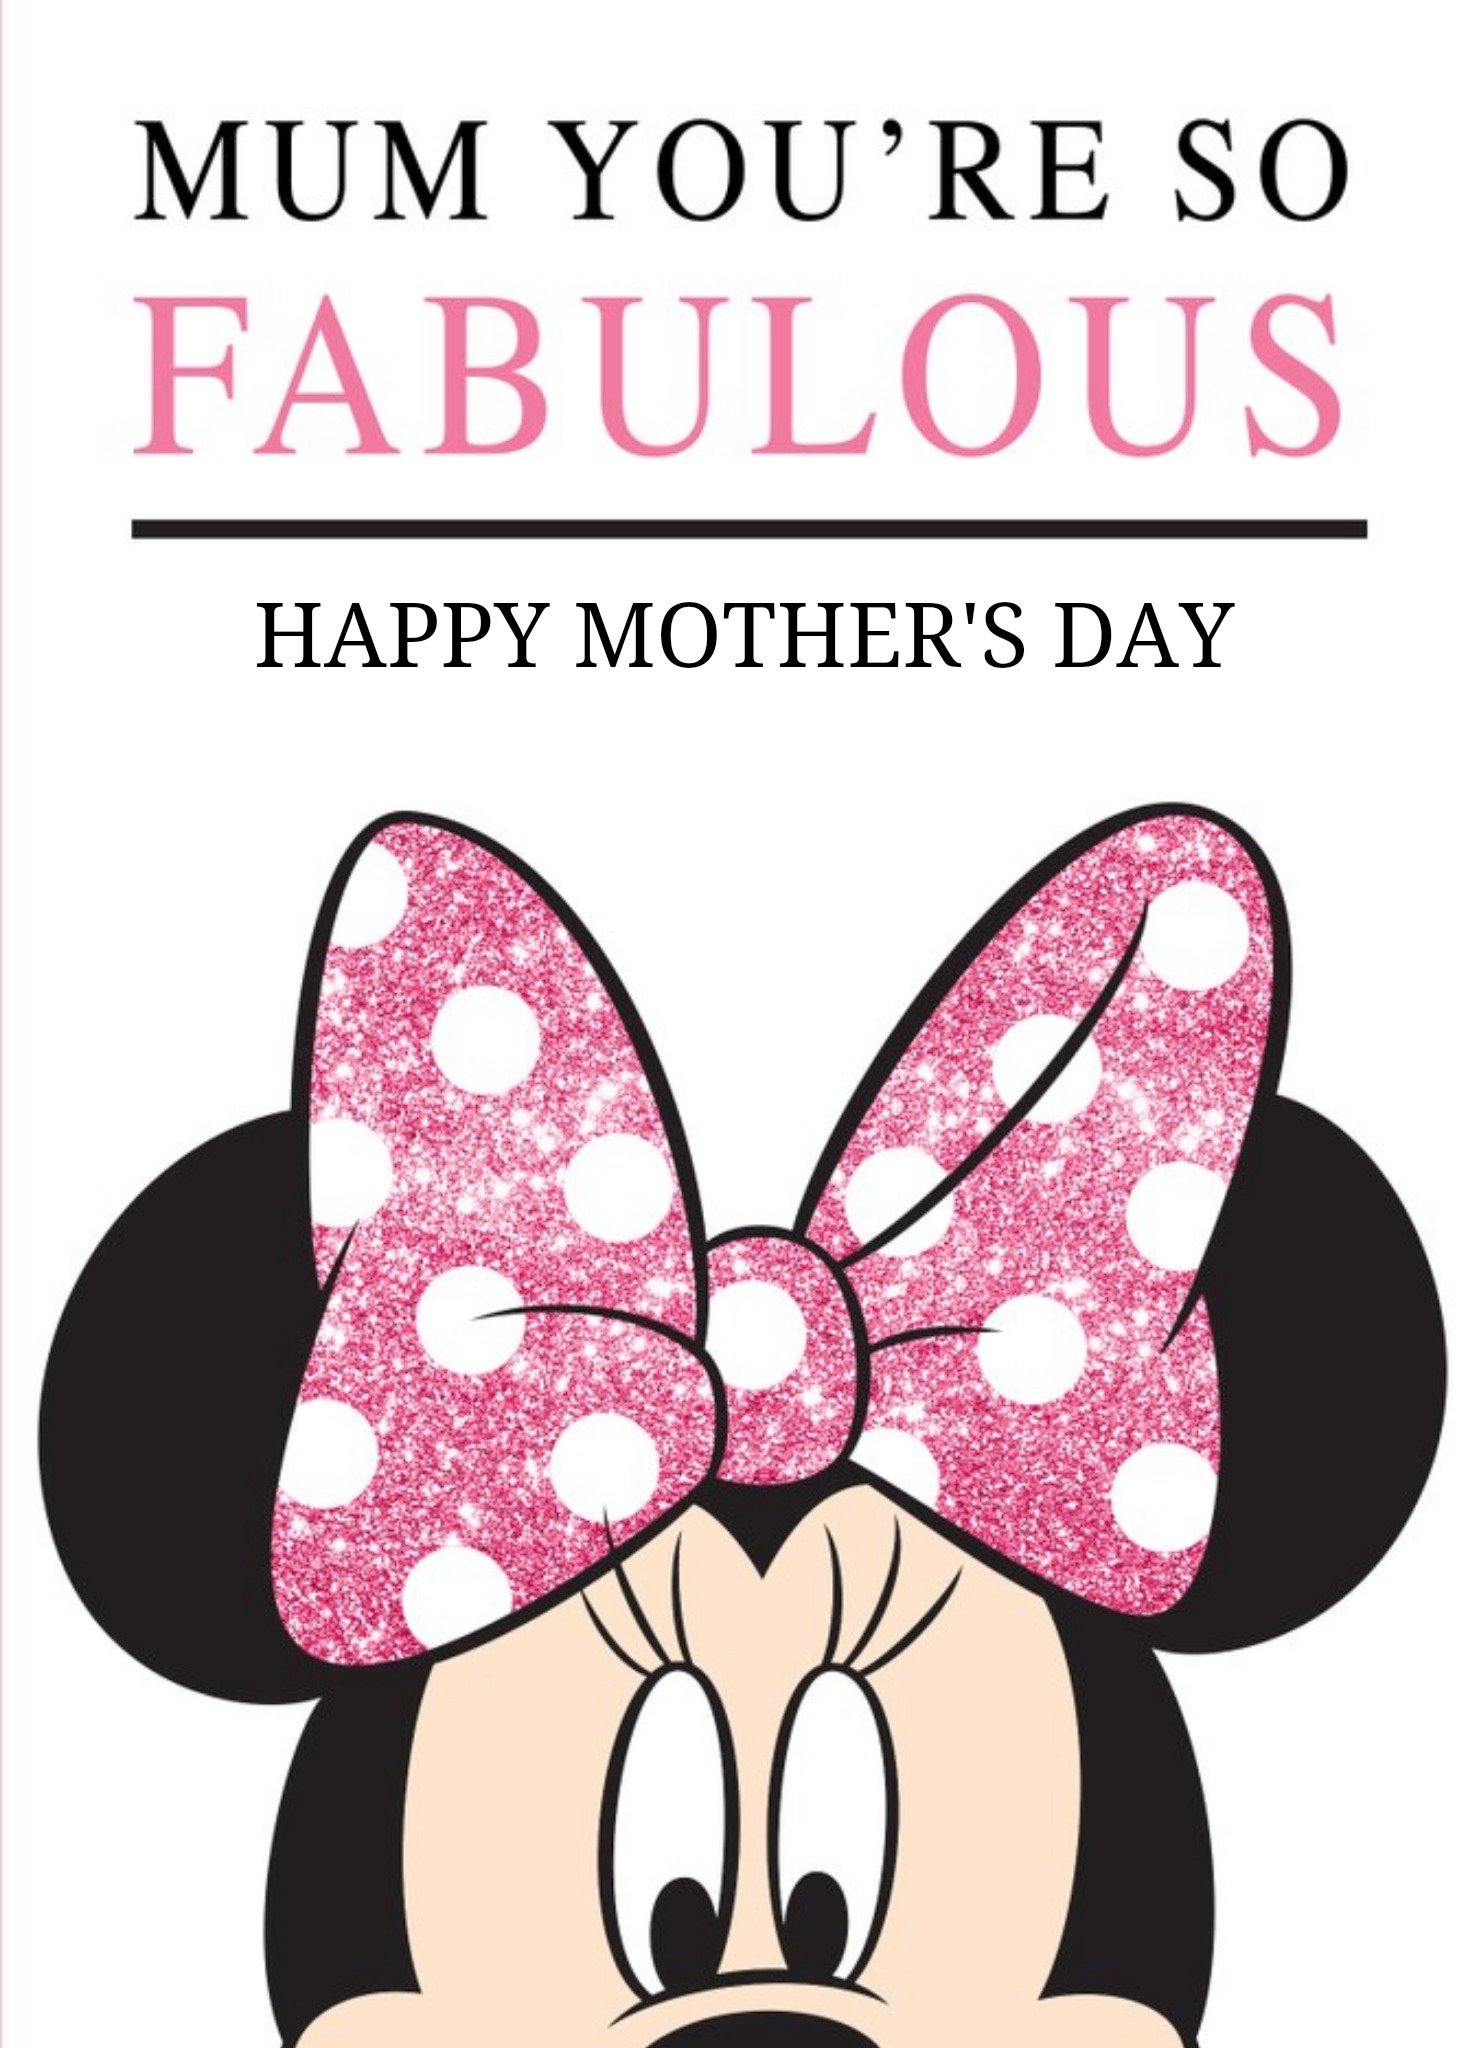 Disney Minnie Mouse Mum You're Fabulous Happy Mother's Day Card Ecard